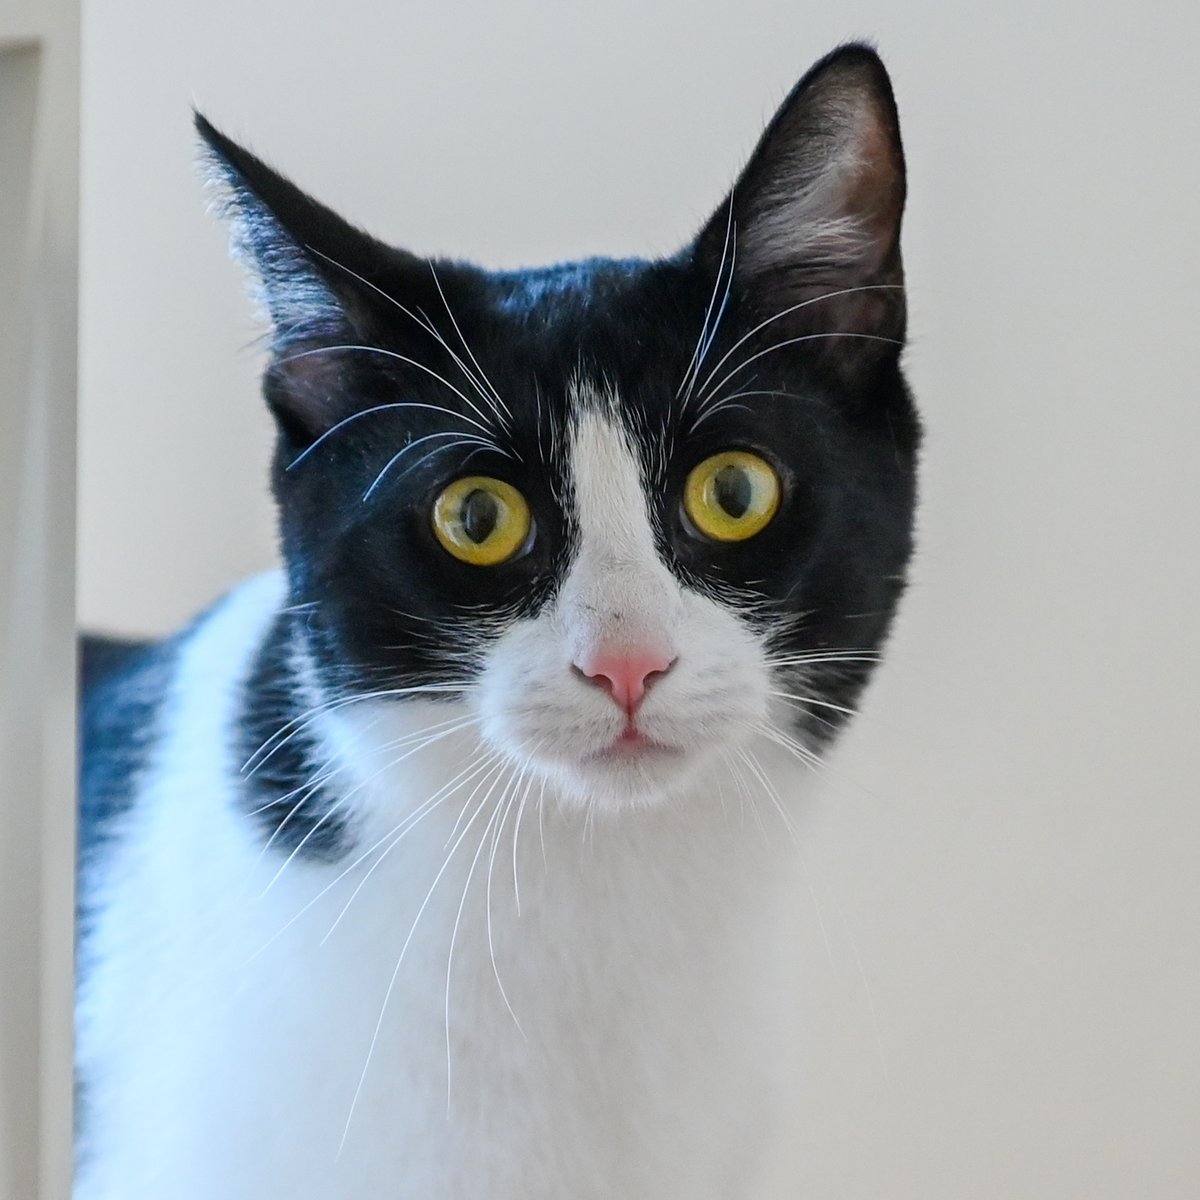 #SanJoaquin Co, CA: Hi, my name is SPOT (it's because I’ve got these very cool black spots mixed in with my white coat). I've been waiting for a home since May 2021.  I’m a 4-year-old male...
adoptrescuecatsinca.com 

#RehomeHour #US #cats #adoptdontshop #SanJoaquinCounty #Calif